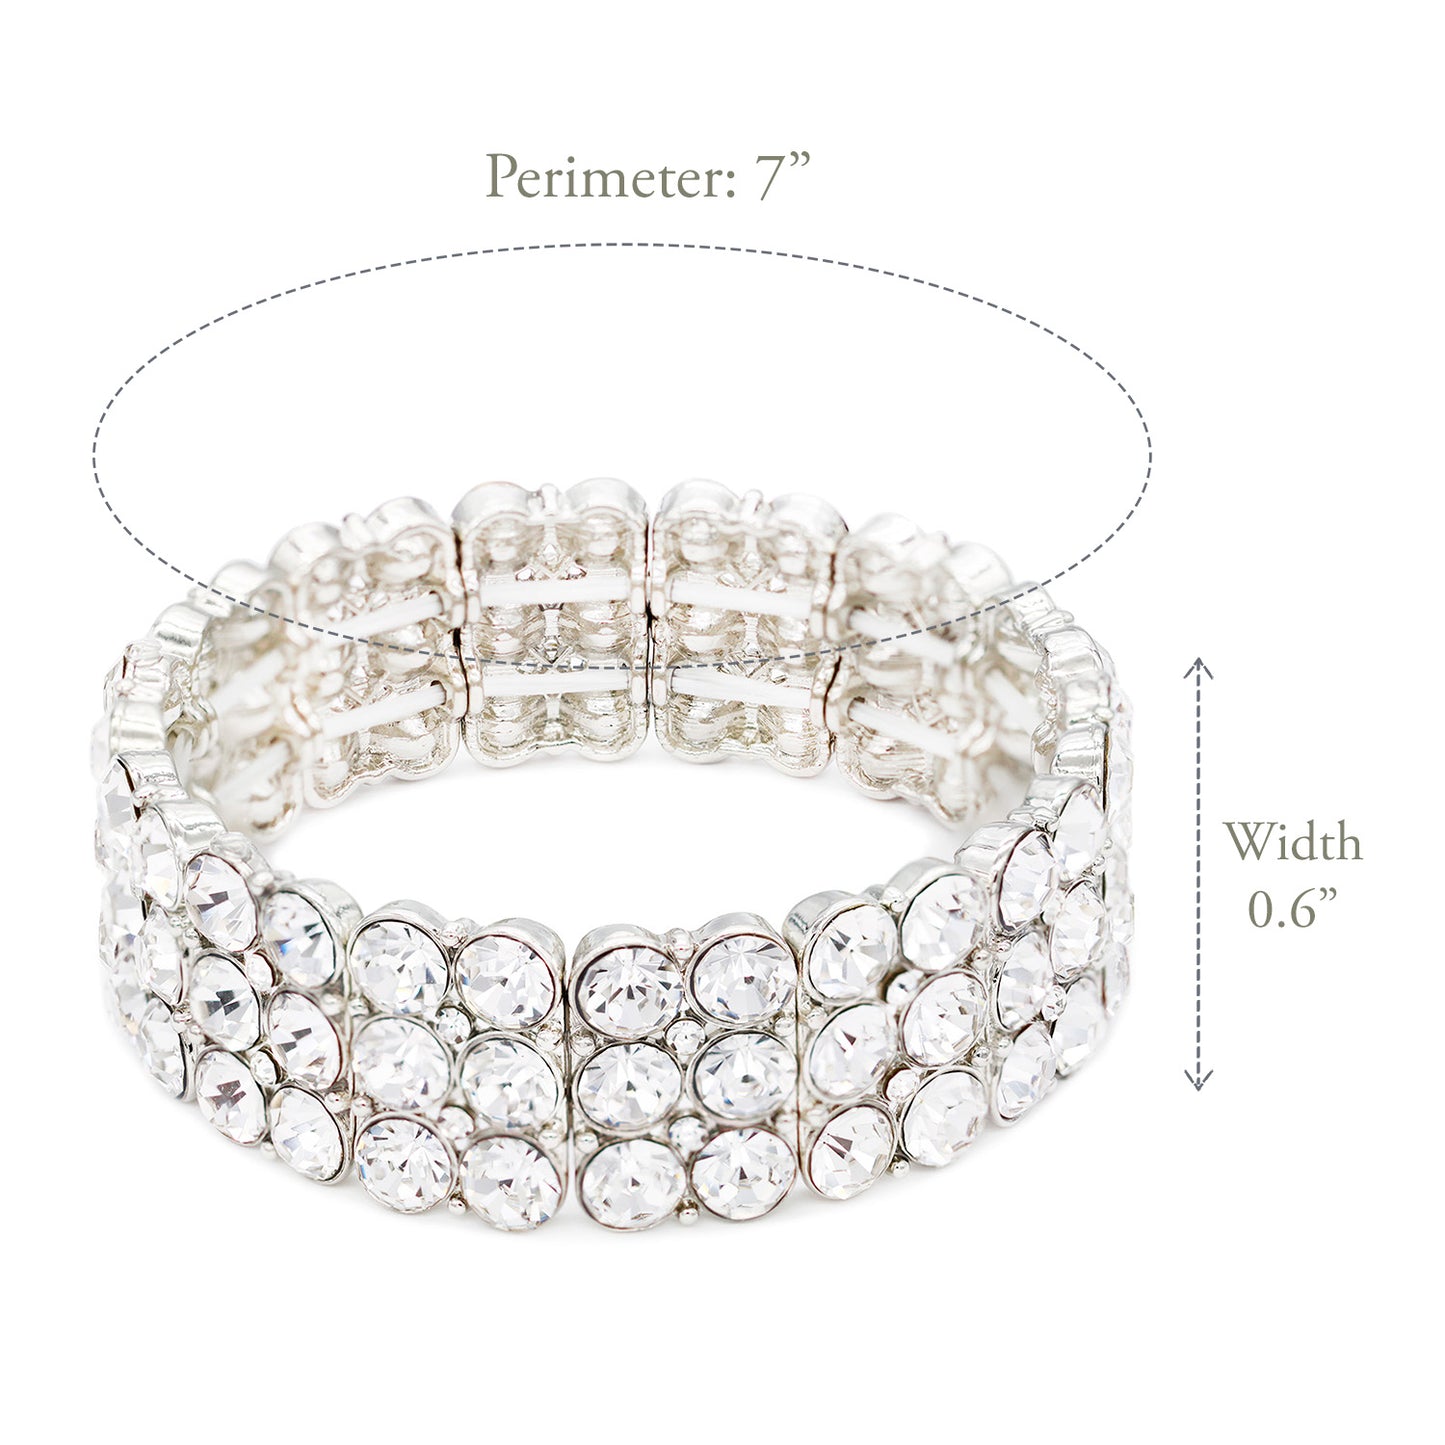 Lavencious Round Shape Rhinestone 3 Lines Stretch Bracelet Evening Party Jewelry 7” (Silver Clear)